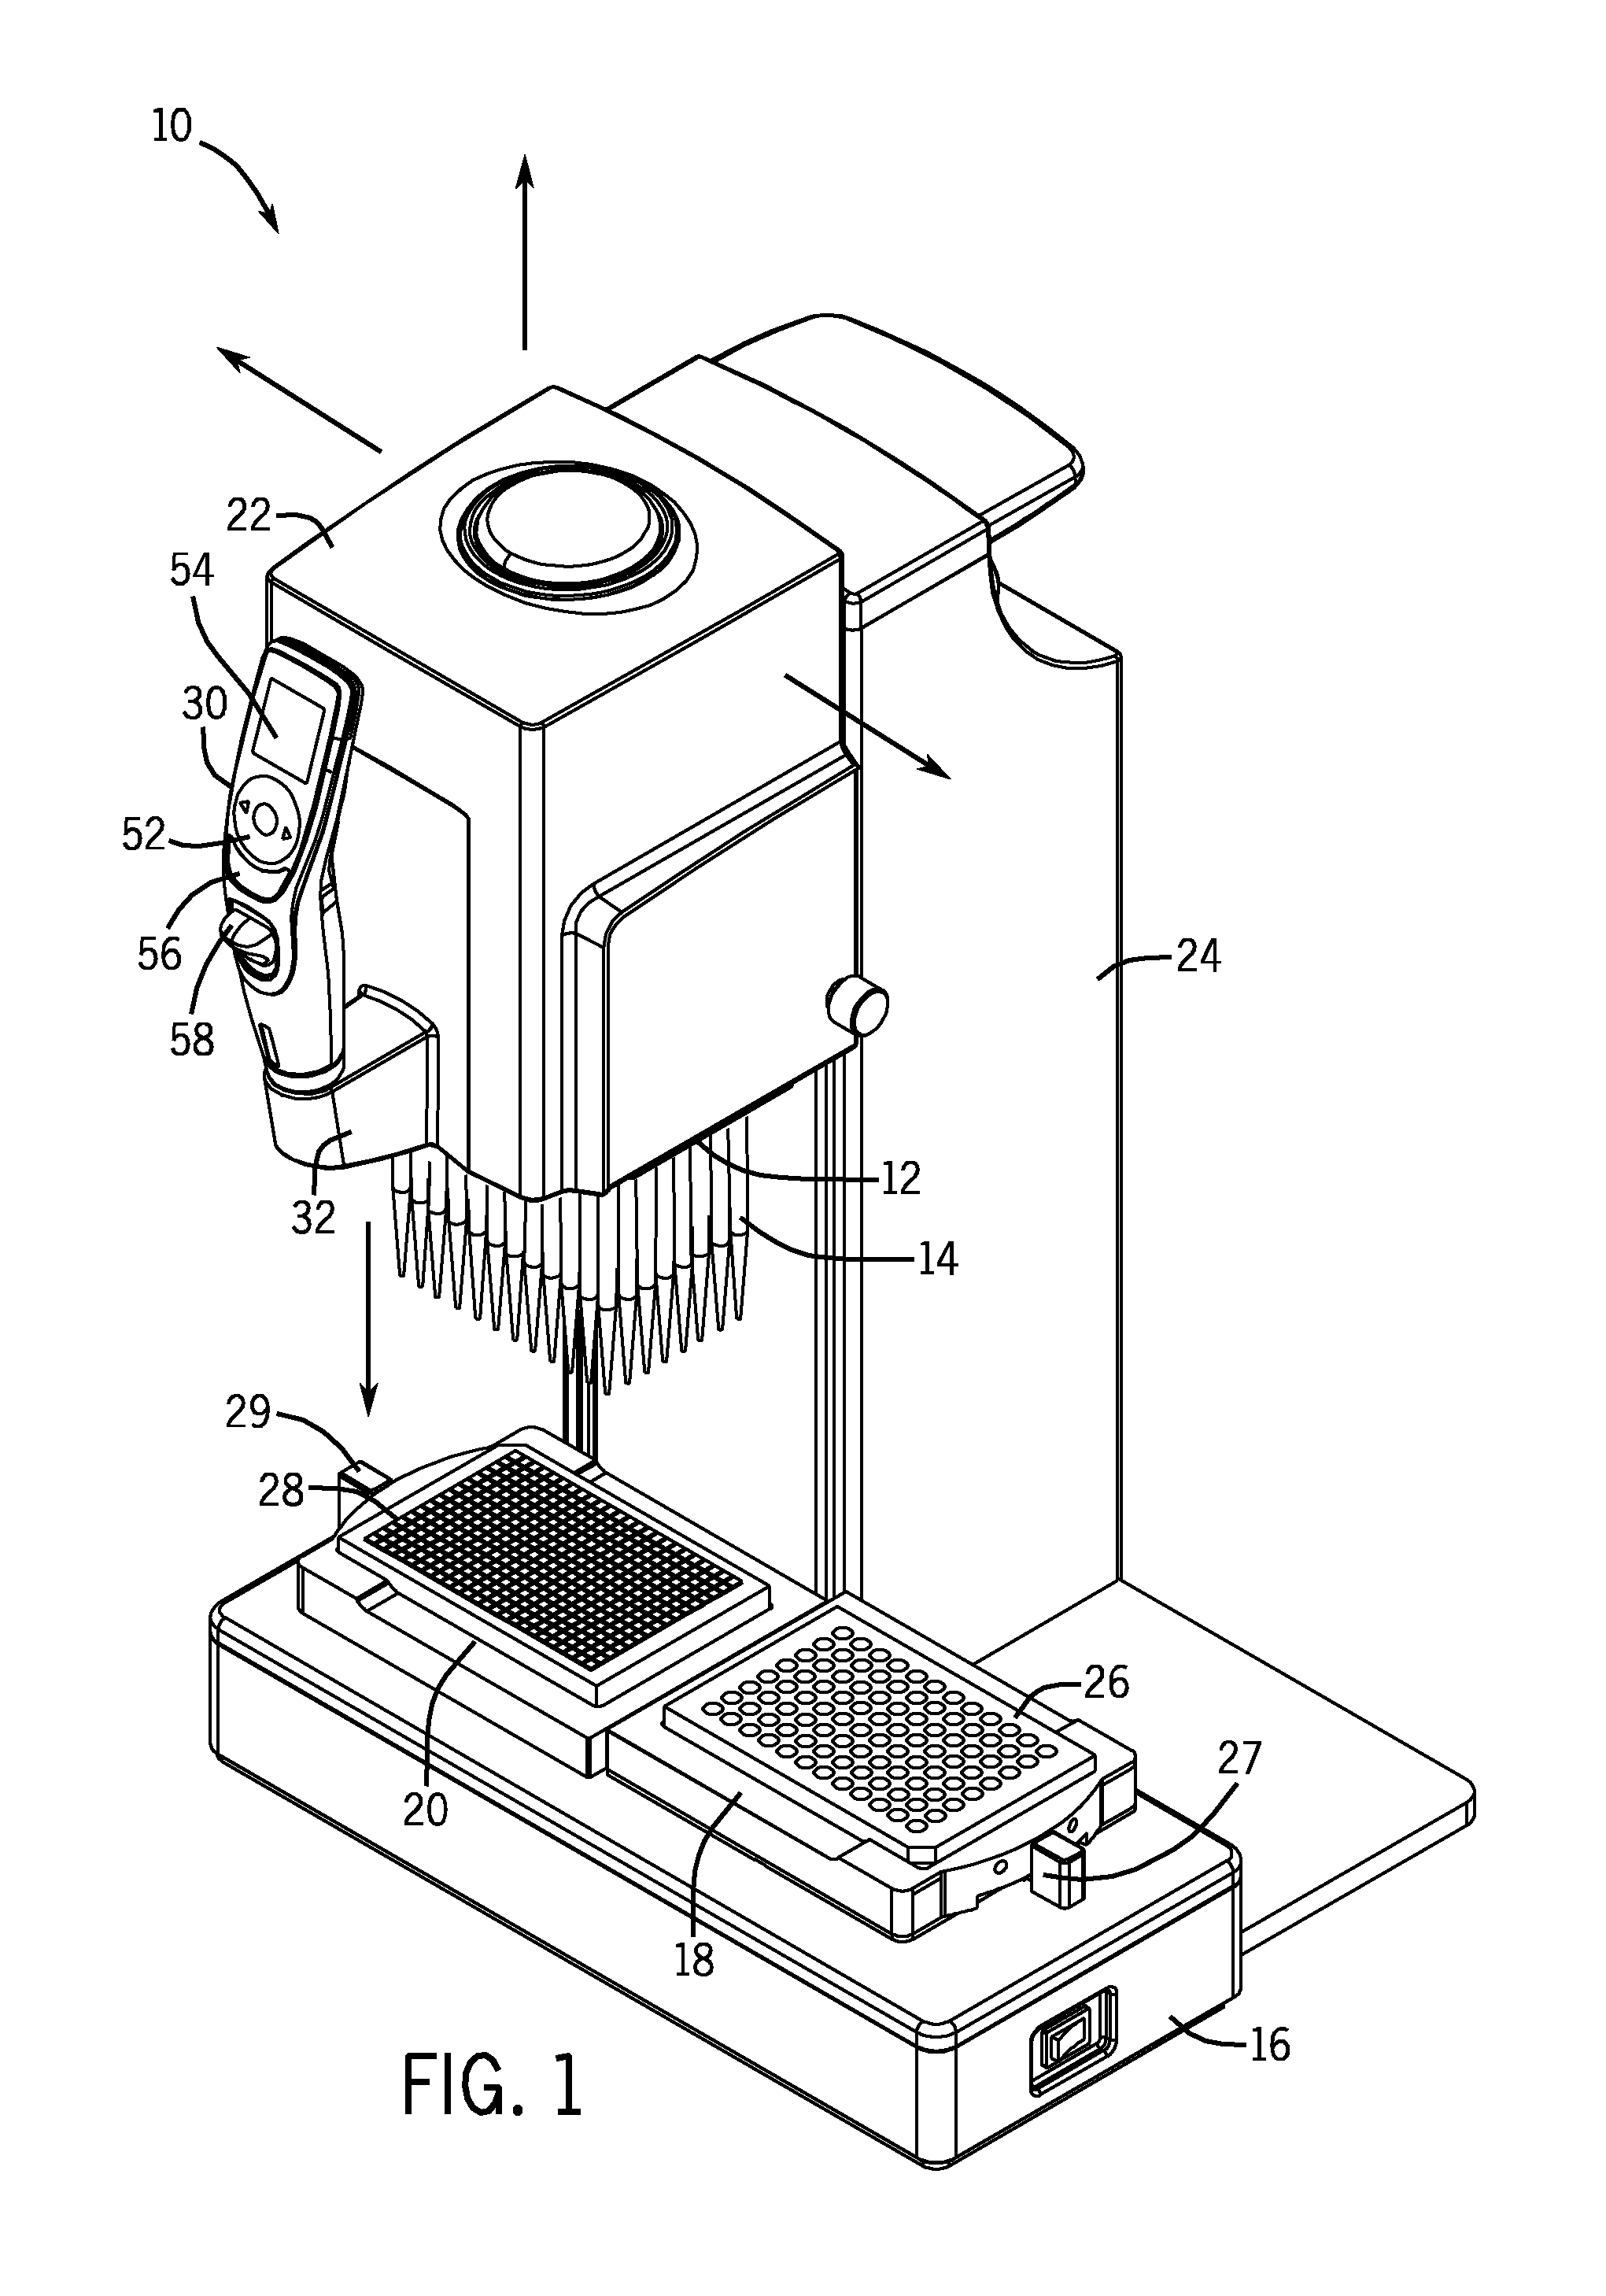 Pipette Tip Positioning For Manually-Directed, Multi-Channel Electronic Pipettor